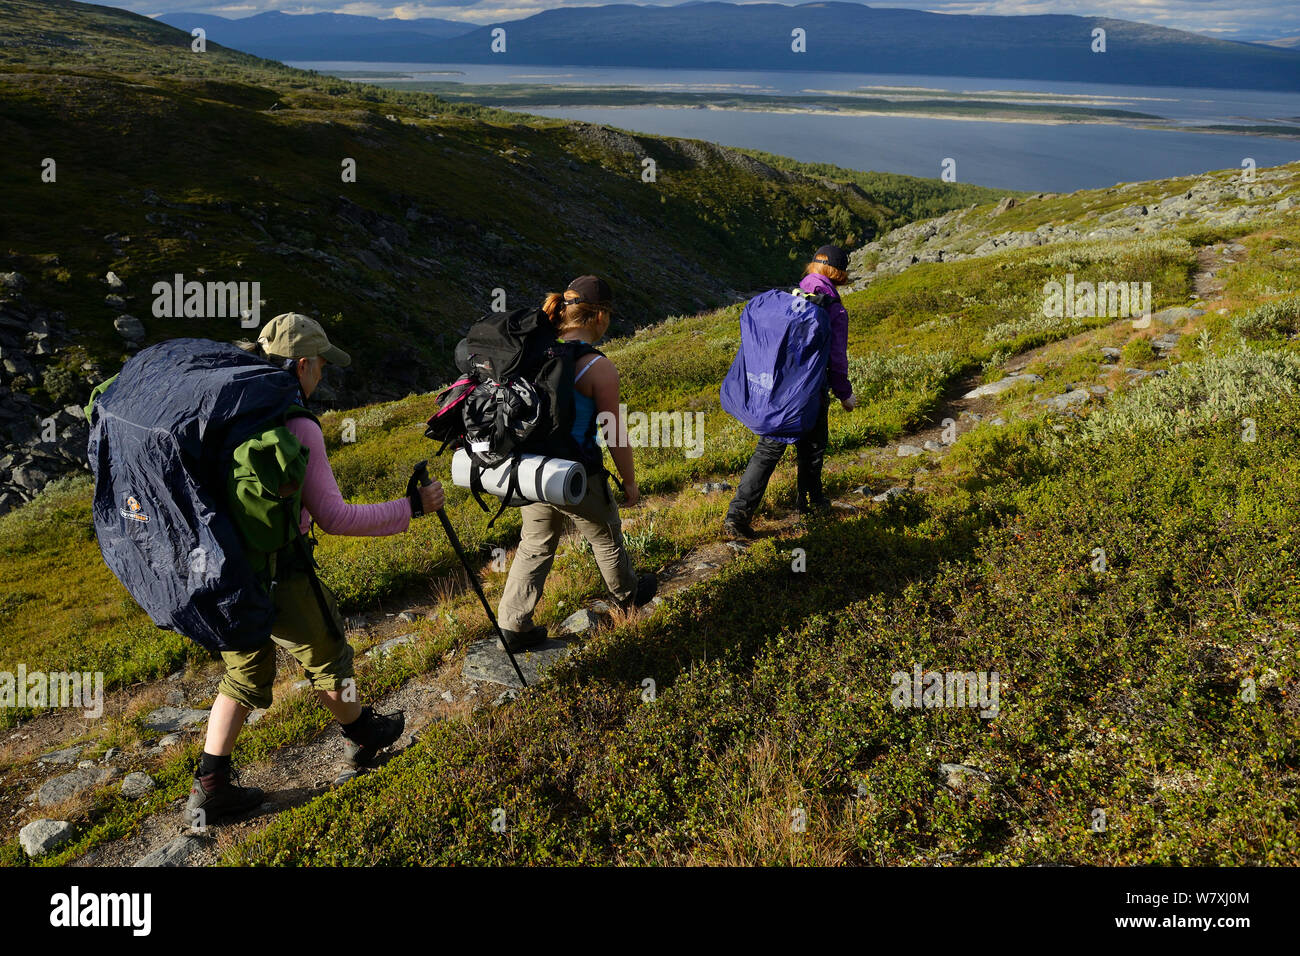 Woman and two teenage girls on hiking trip, on the Laponia Circuit, along the Padjelantaleden trail, Padjelanta National Park and Sarek National Park, Norrbotten, Lapland, Sweden.  Model released Stock Photo